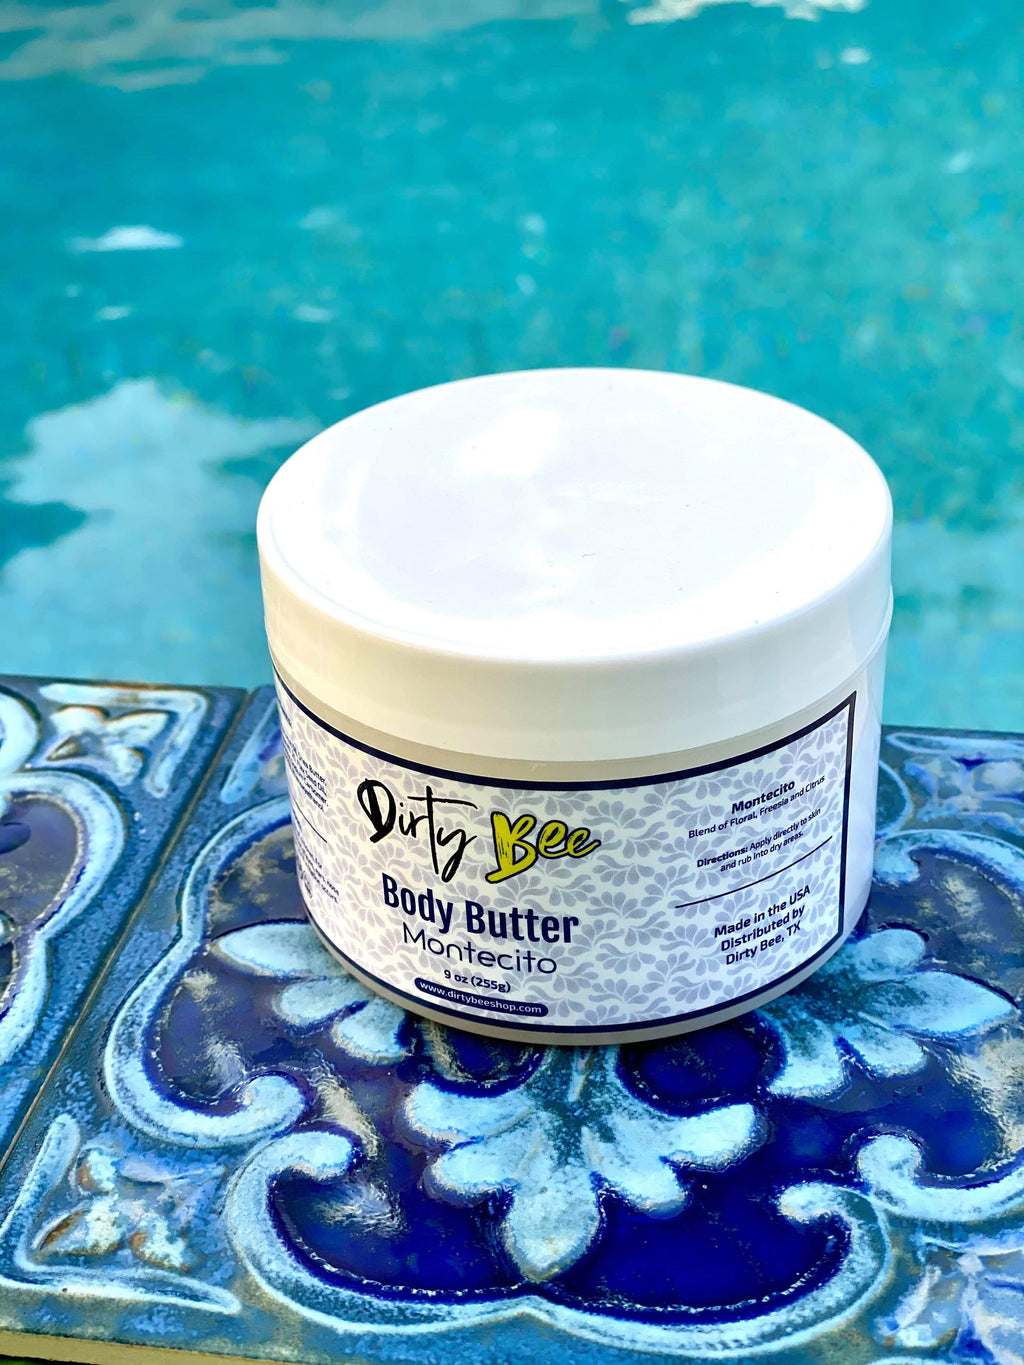 Montecito Body Butter - On Hand-Bath & Body, body, Body Butter, Dirty Bee, Dropship, Montecito-Womens Artisan USA American Made Clothing Accessories